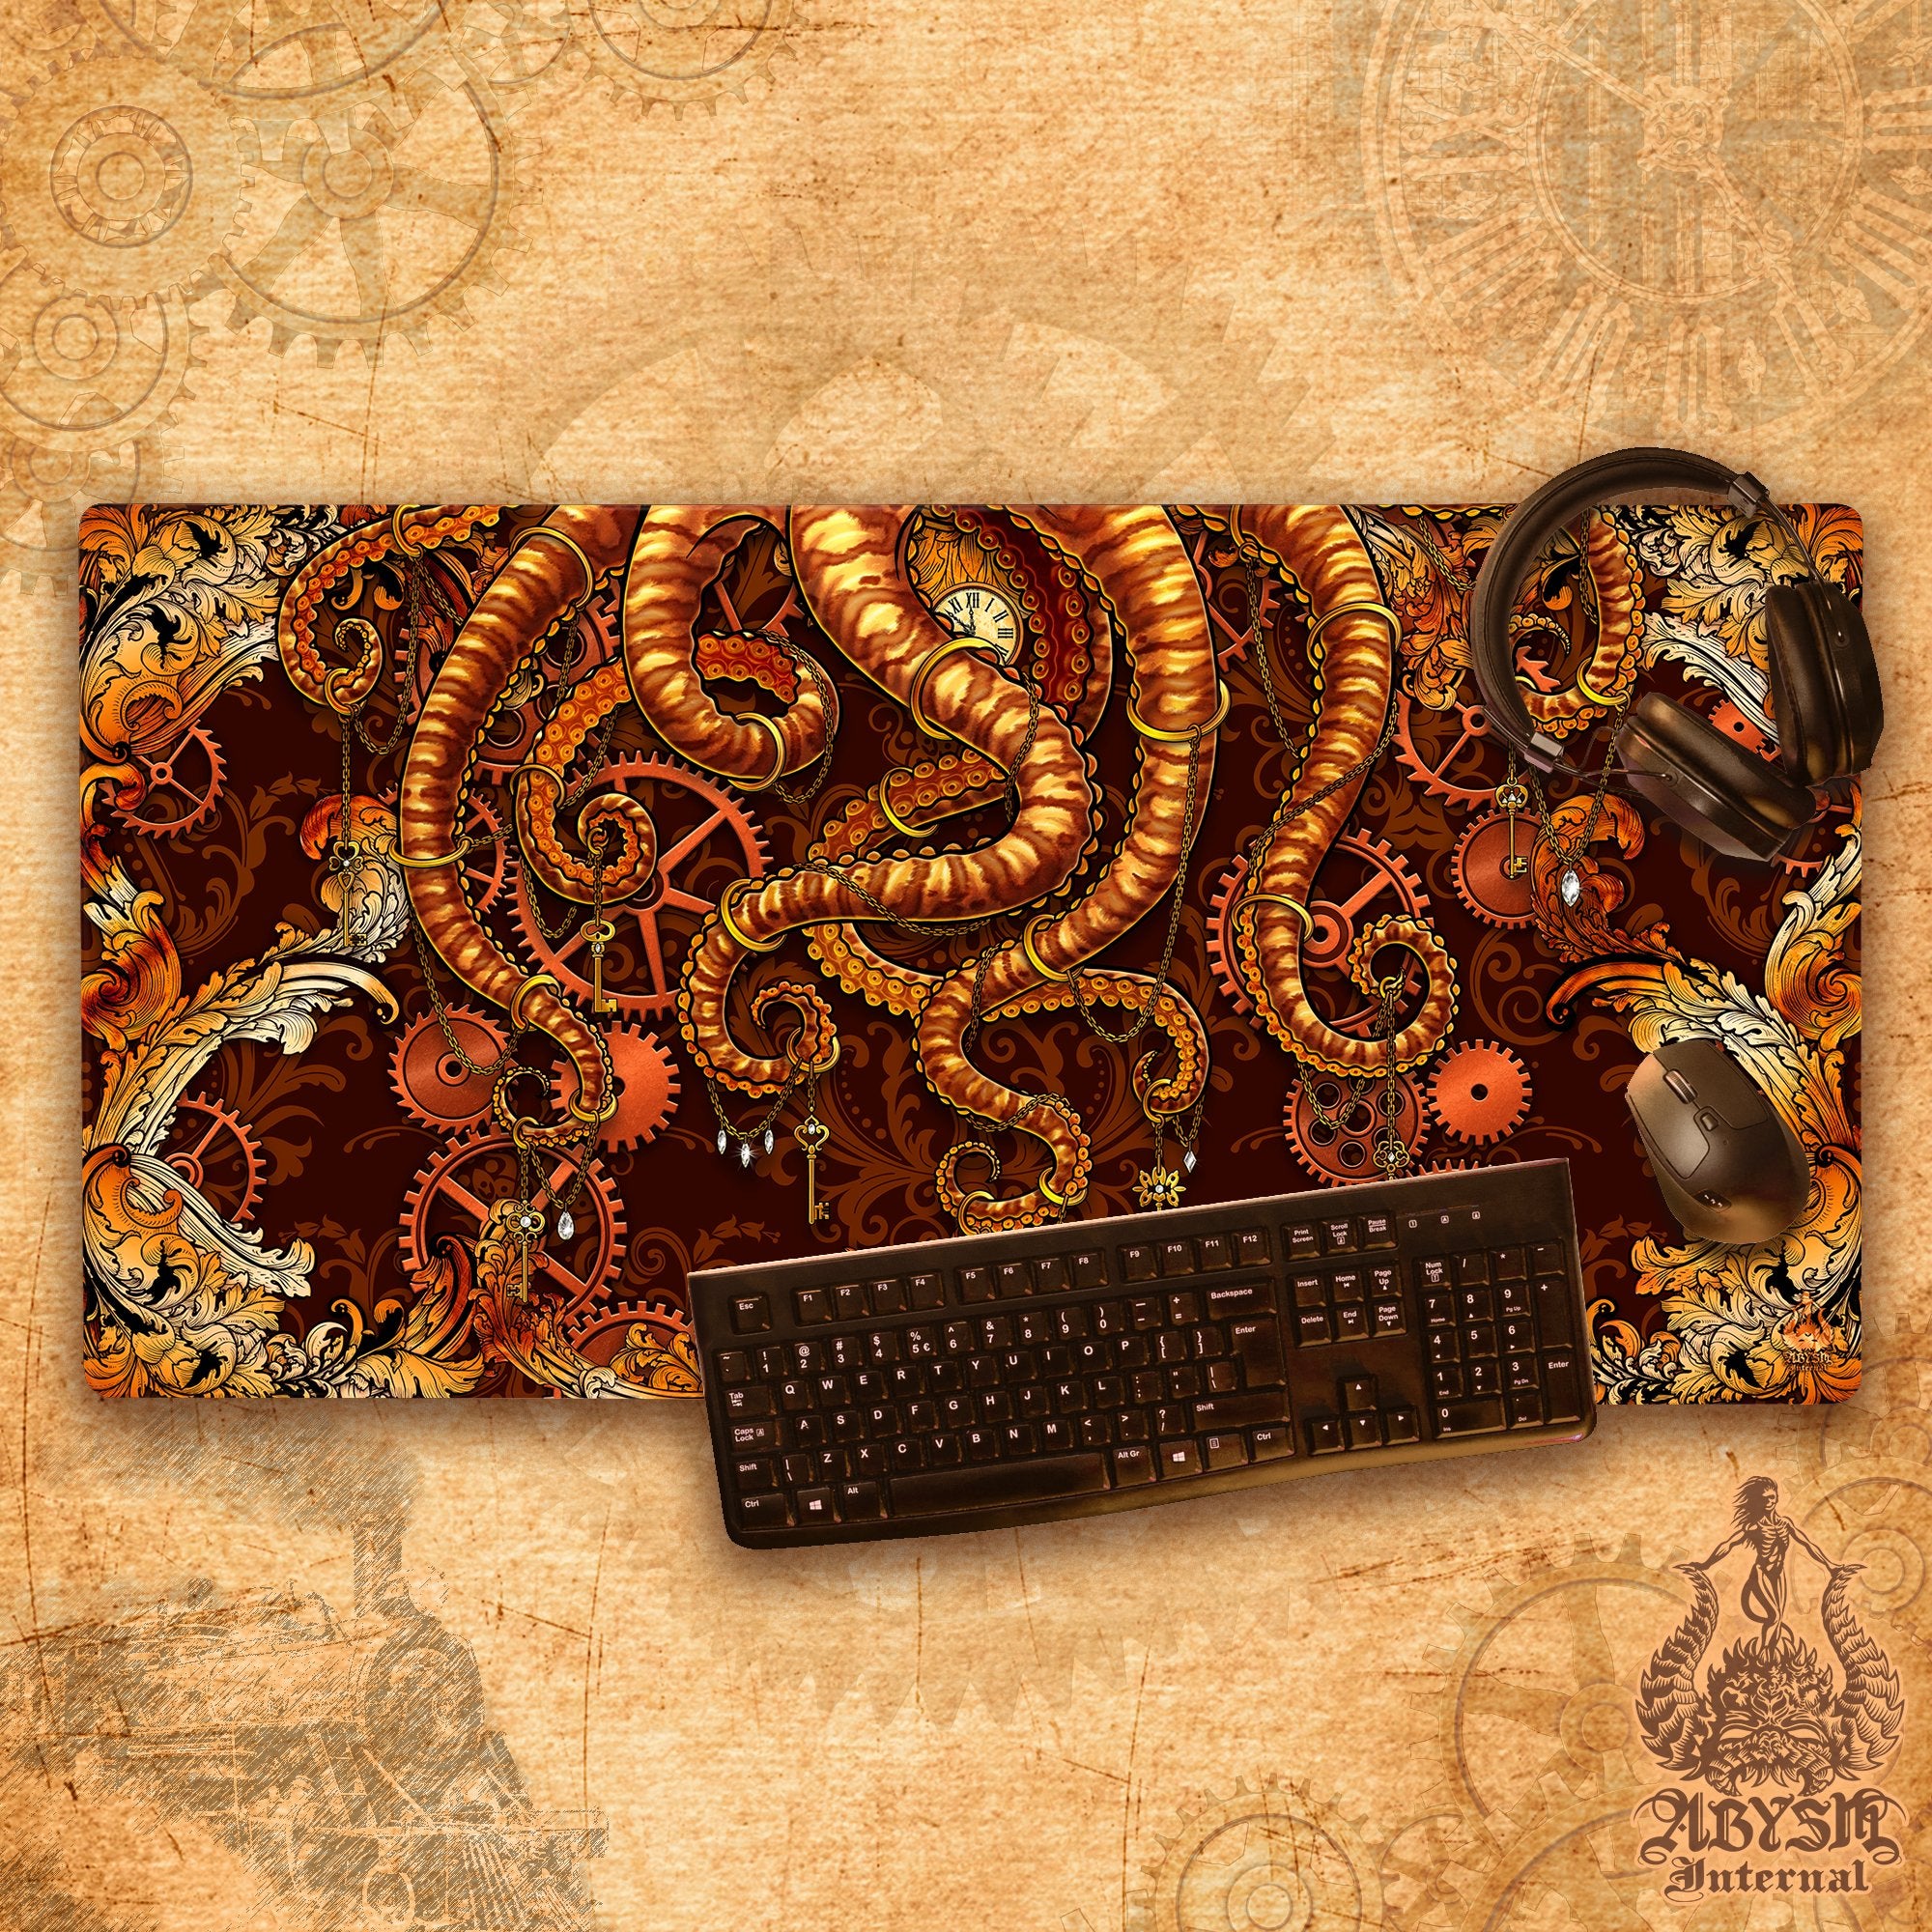 Octopus Gaming Desk Mat, Tentacles Mouse Pad, Steampunk Table Protector Cover, Gears Workpad, Fantasy Art Print - Abysm Internal